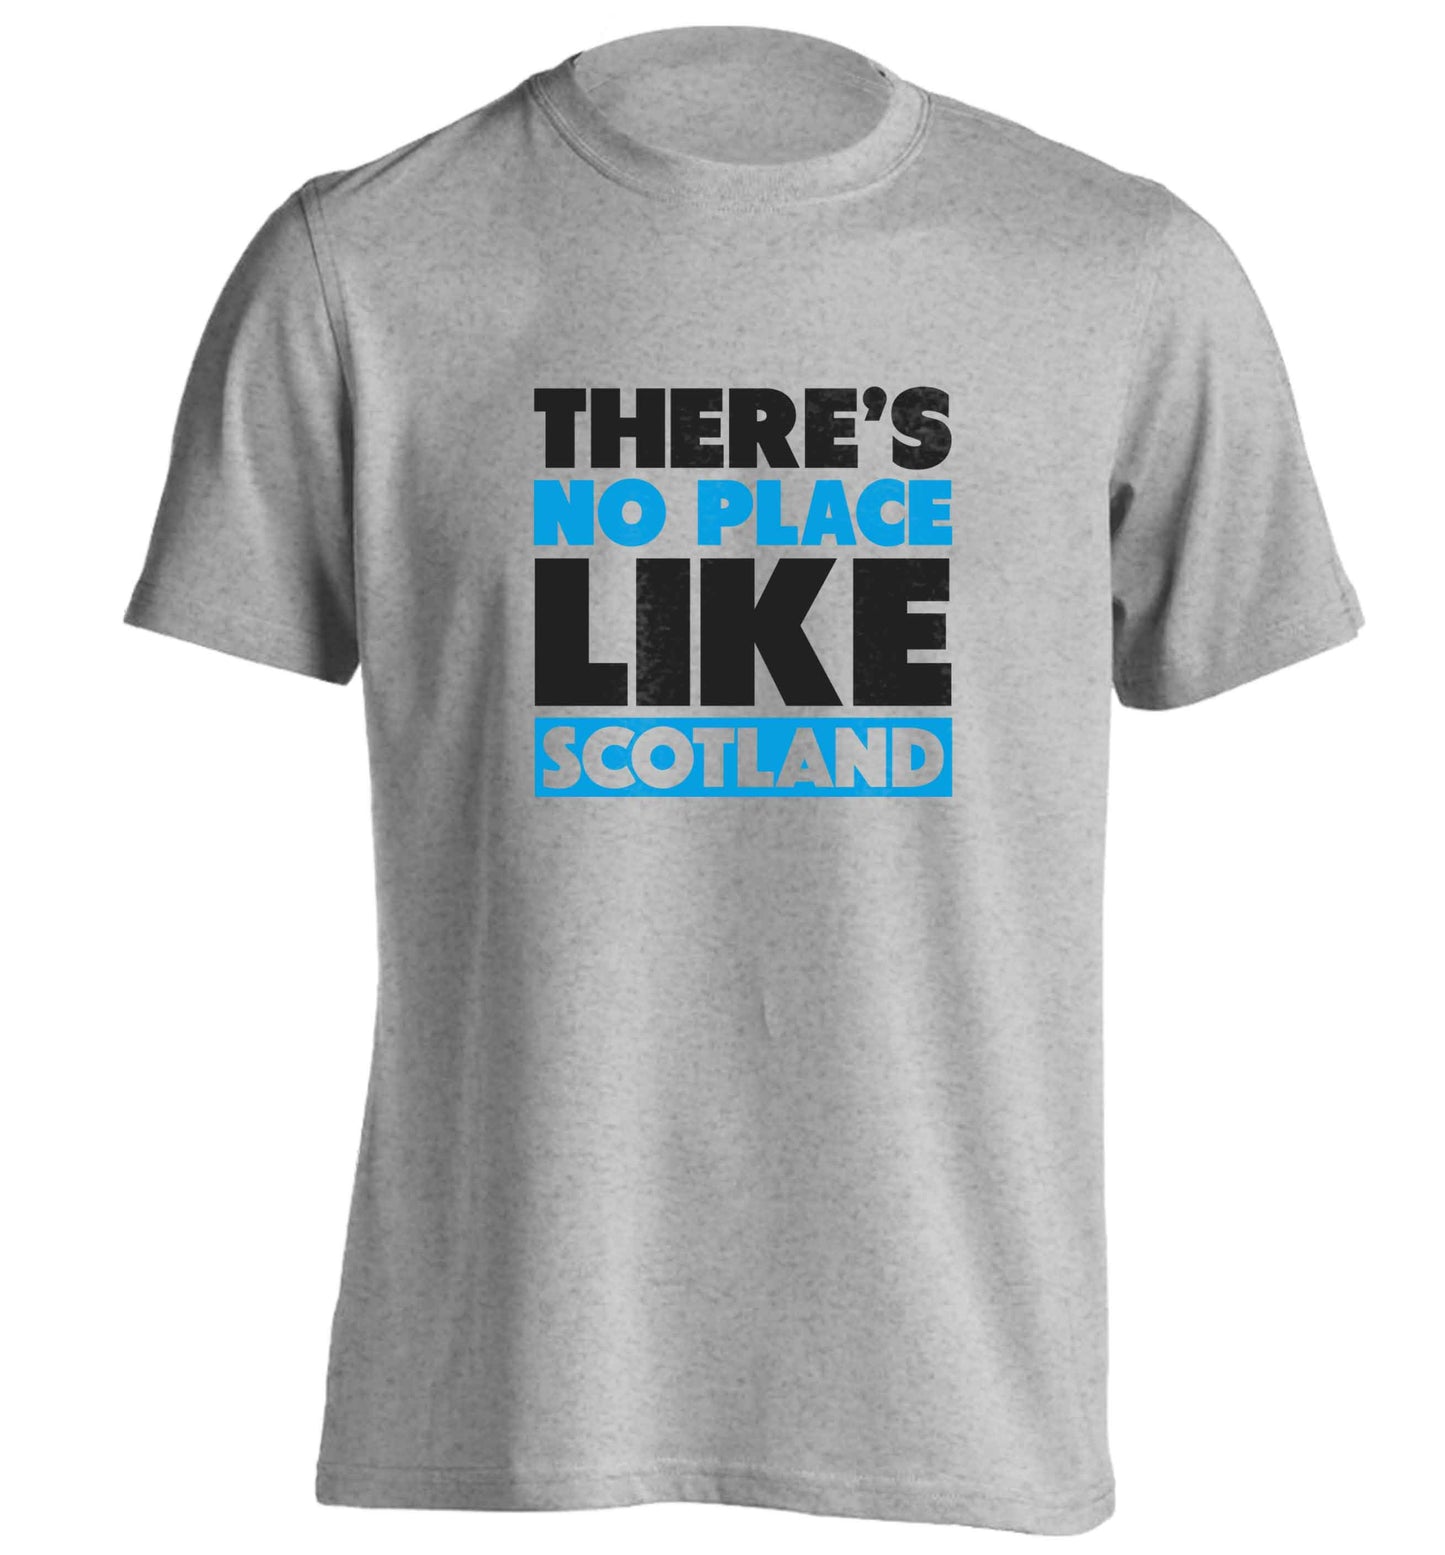 There's no place like Scotland adults unisex grey Tshirt 2XL